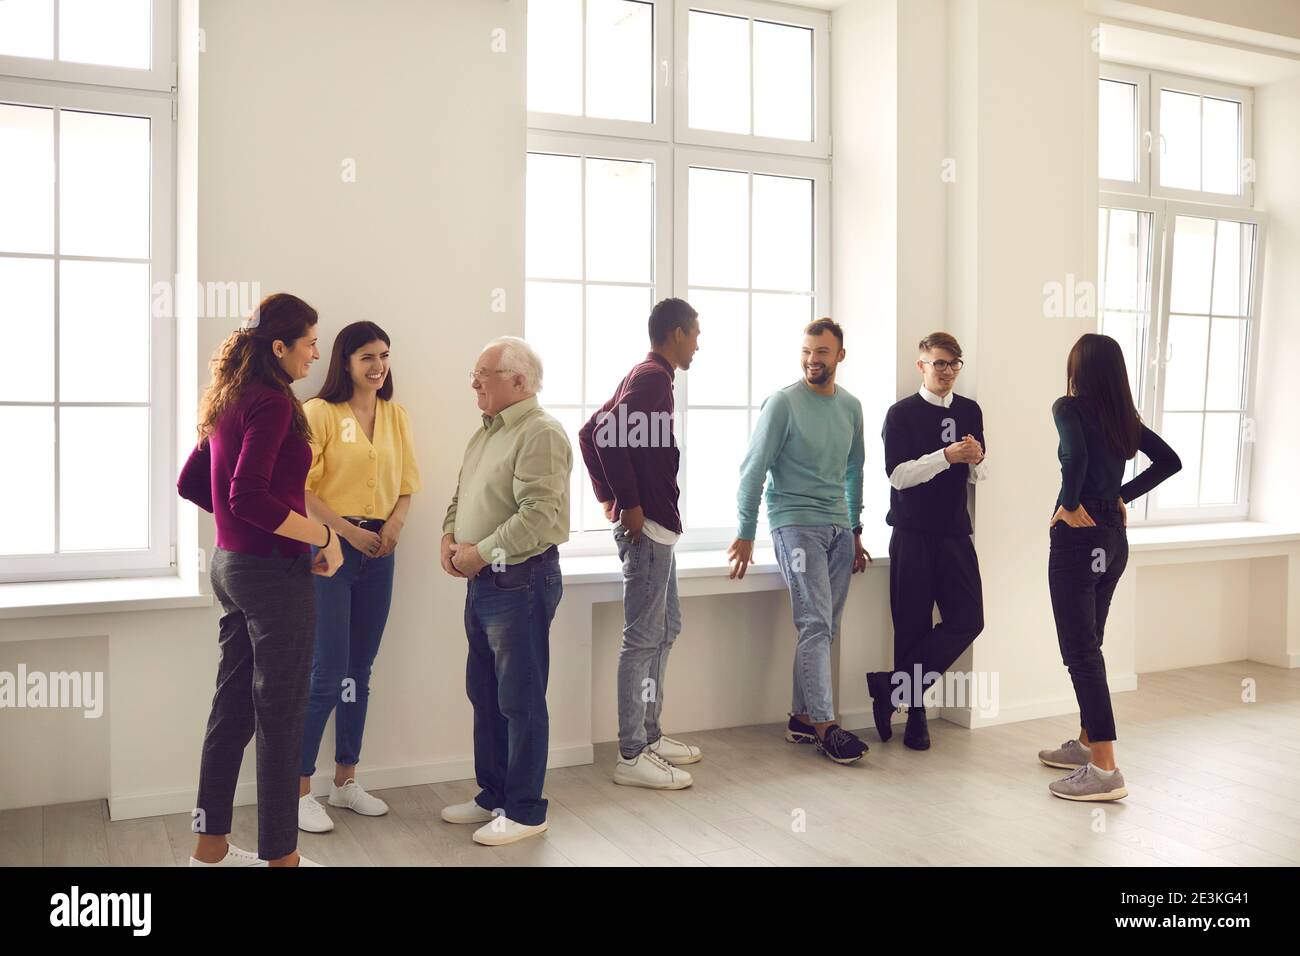 Office workers stand in a bright hall and communicate with each other during a break from work. Stock Photo